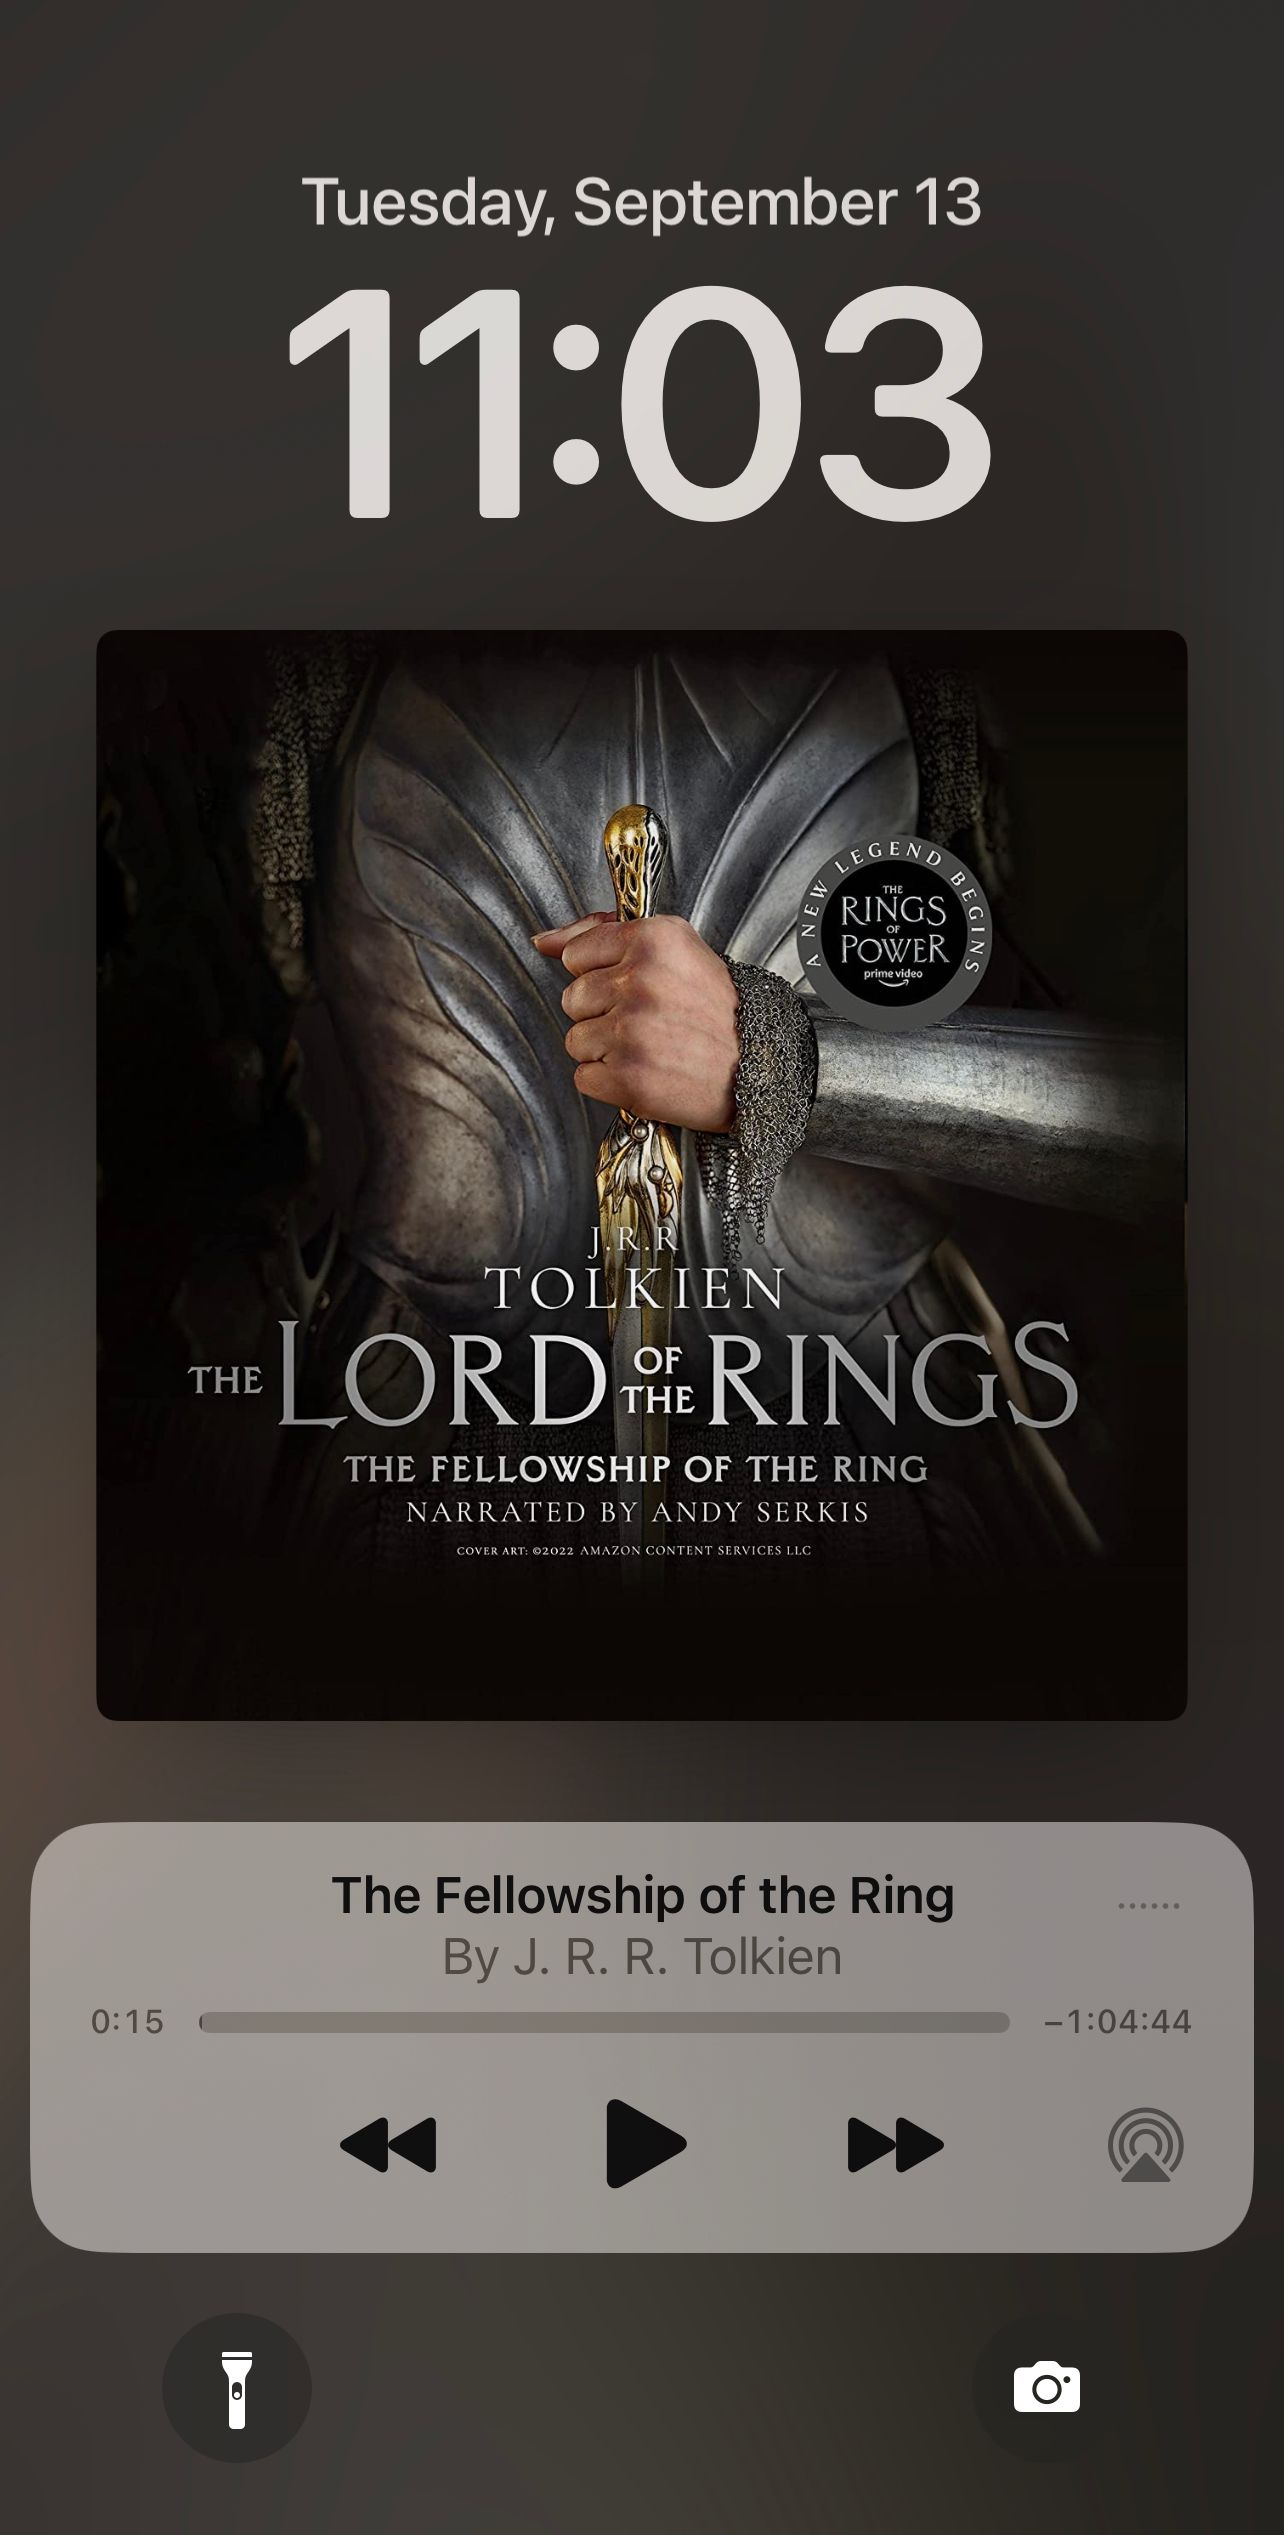 An iOS screenshot featuring an audiobook cover of Fellowship of the Ring.